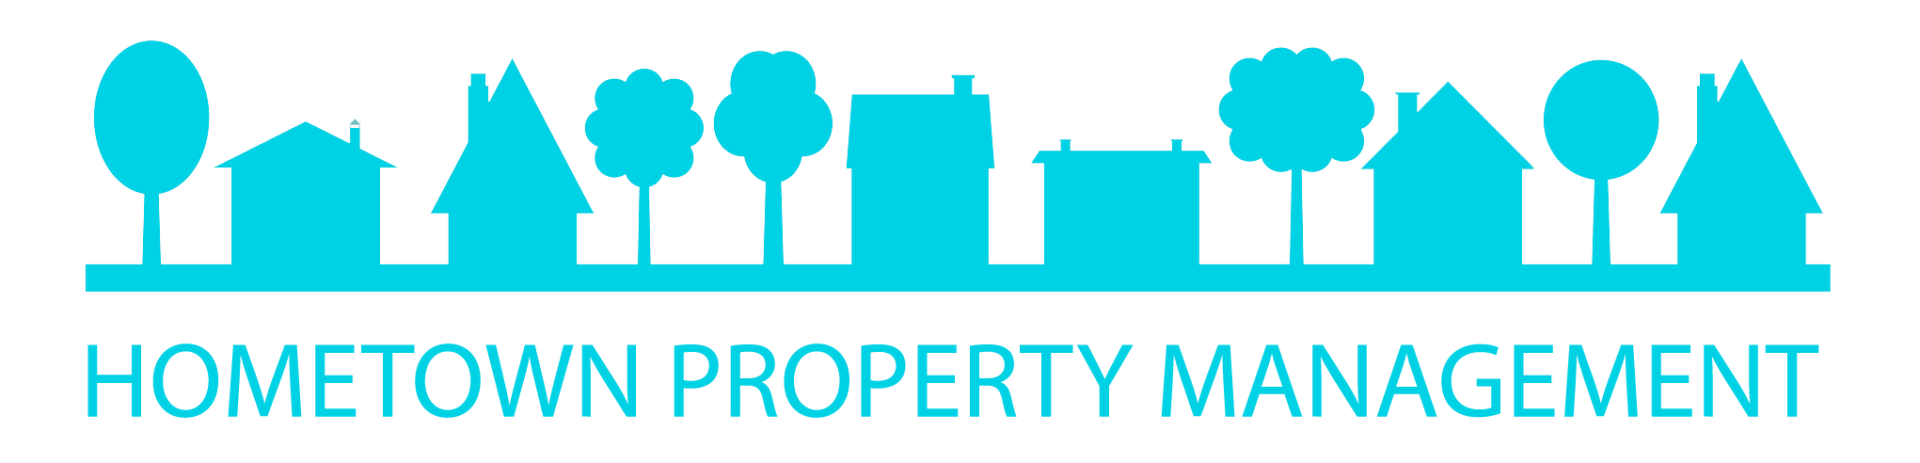 HOMETOWN-PROPERTY-MANAGEMENT